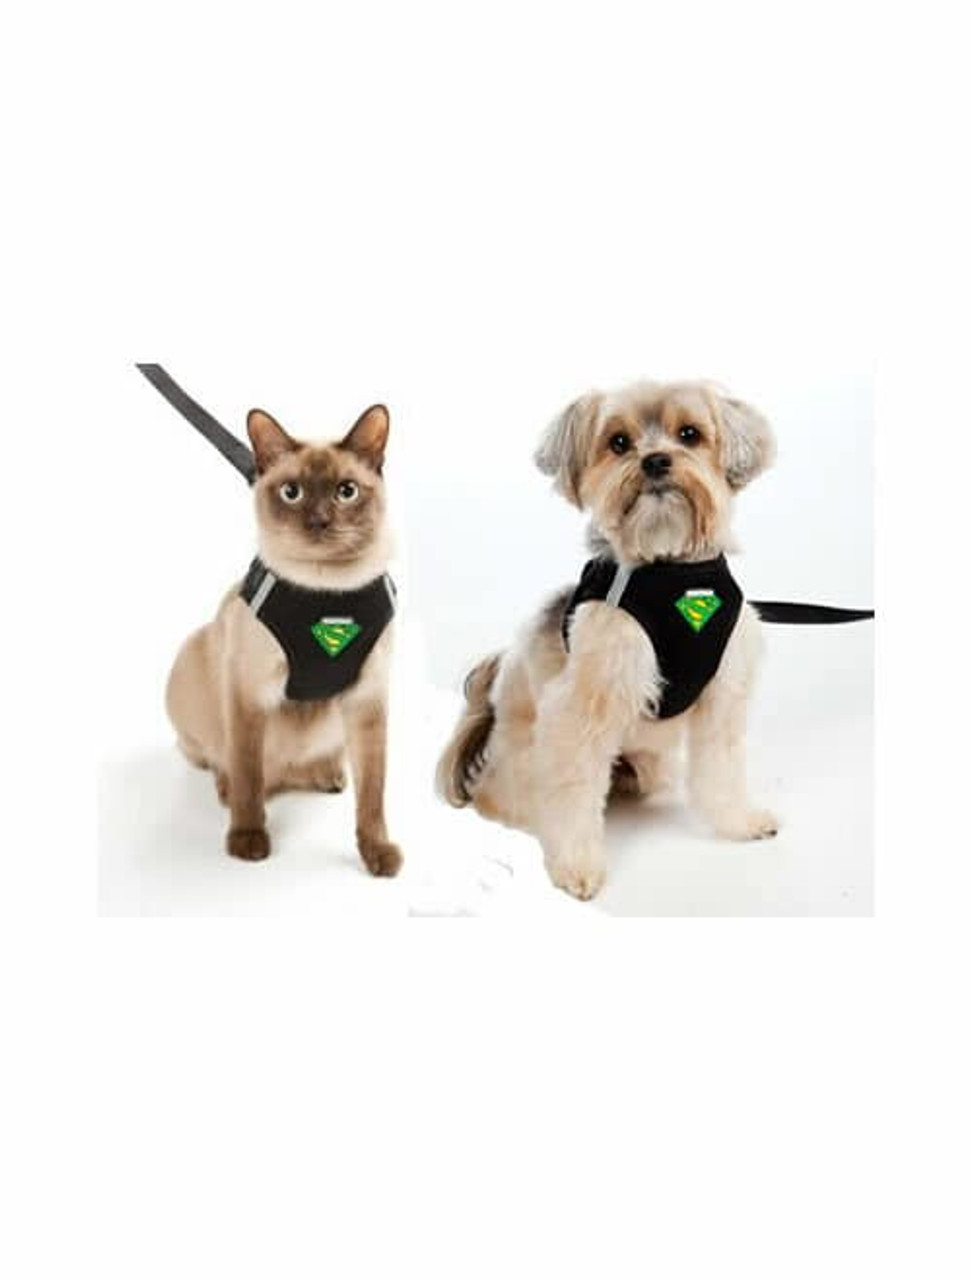 TSA Fast Pass Leash & Harness for In-Cabin Airline Travel